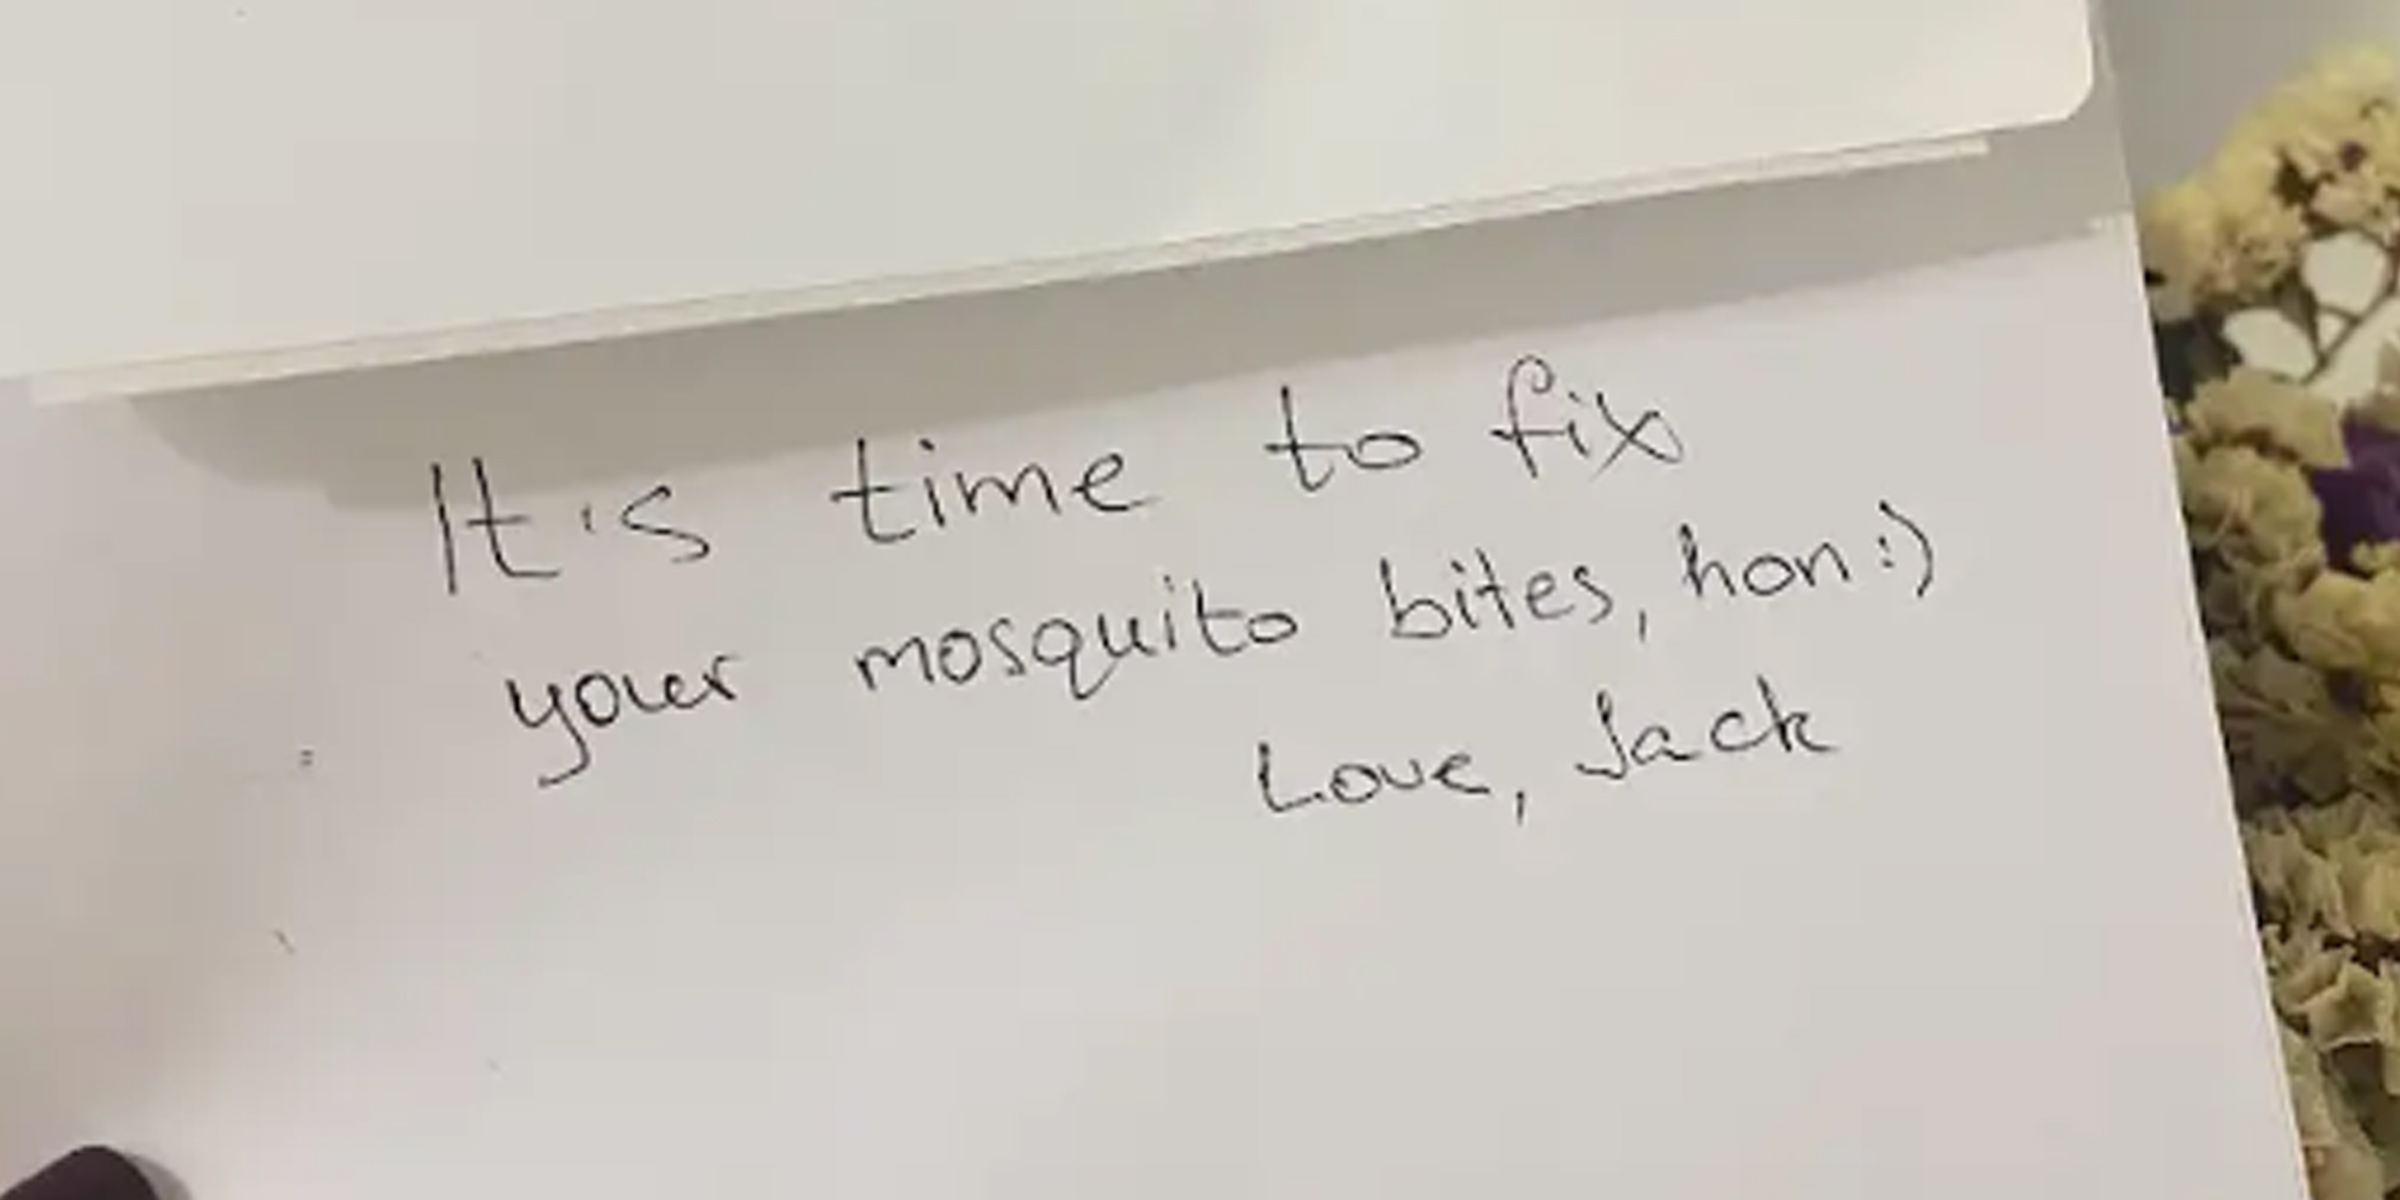 A note from Jack to Nikkie | Source: Amomama